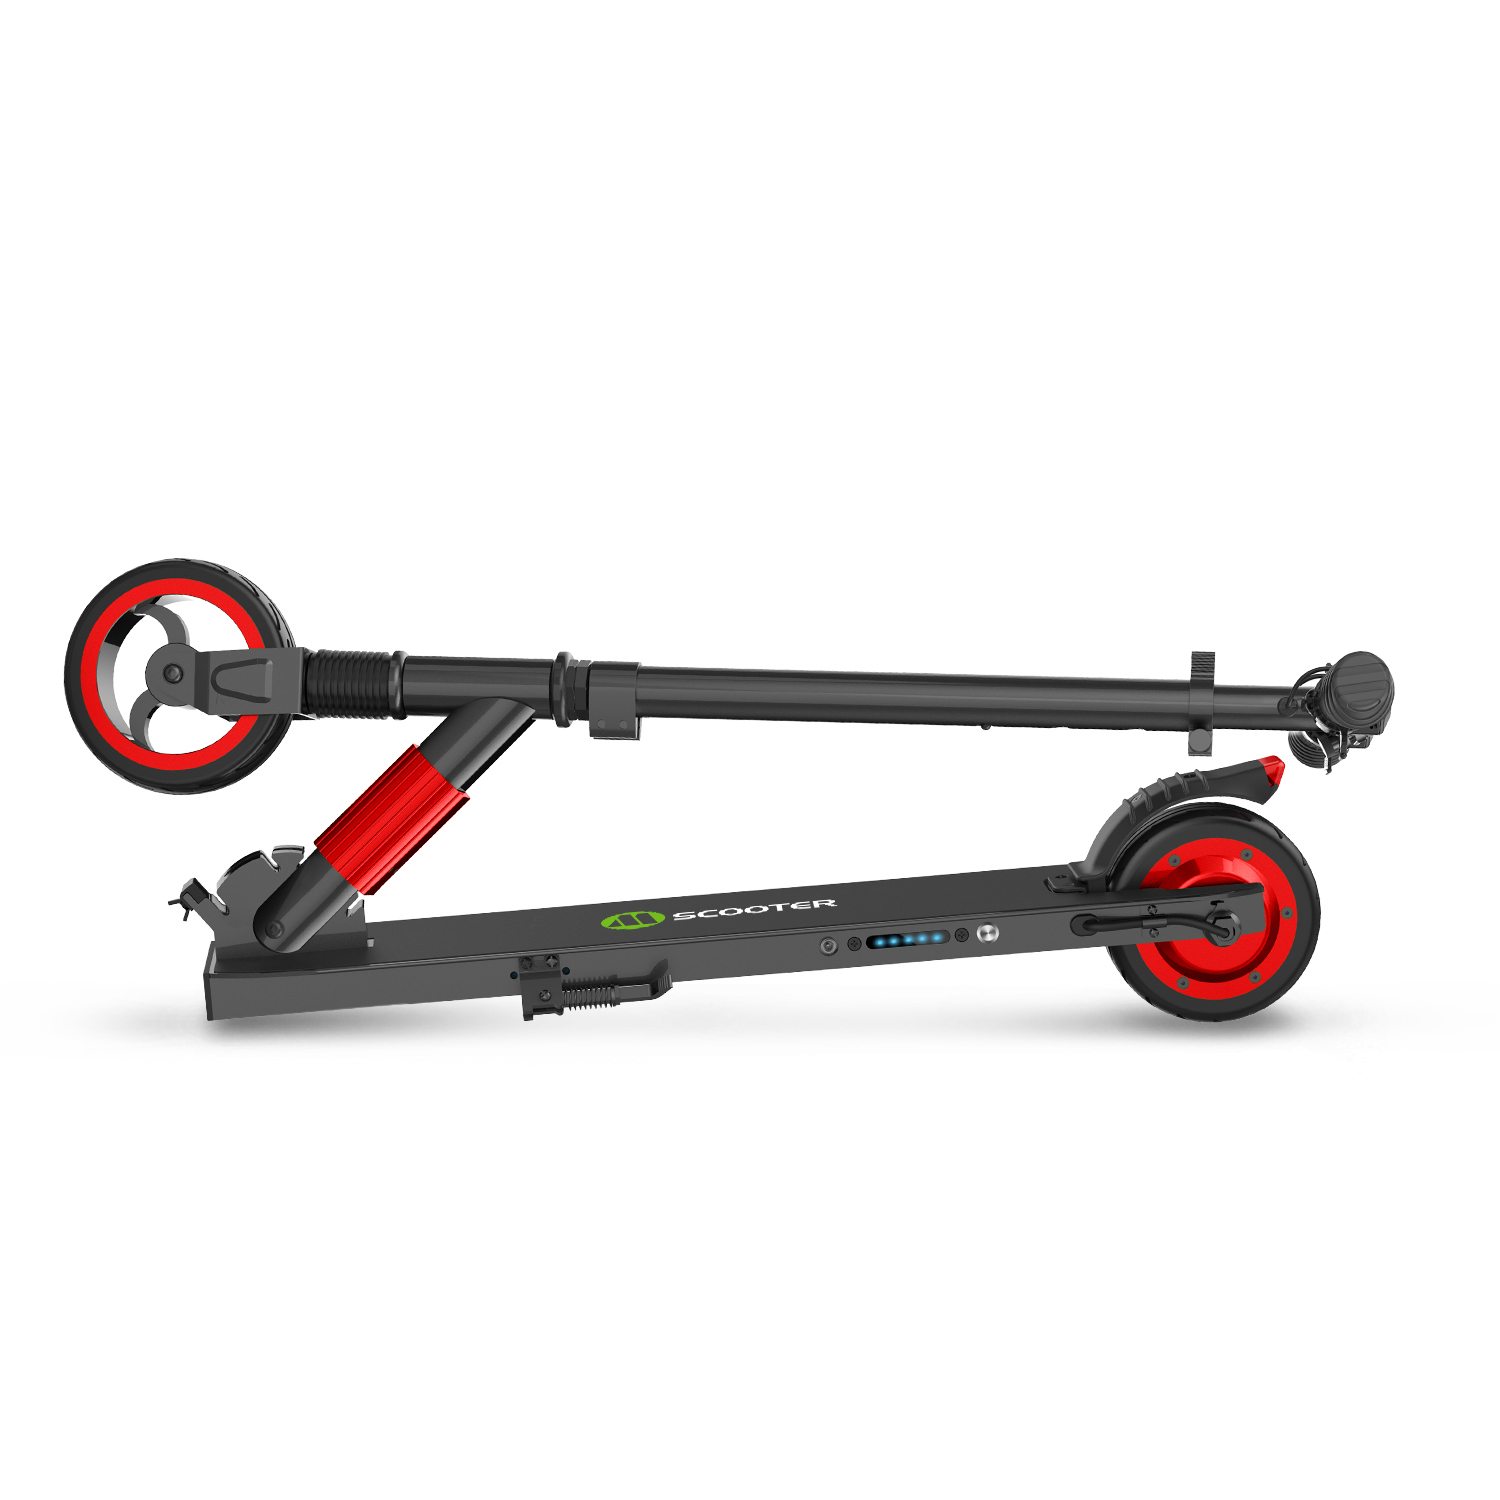 Find US Direct Megawheels S1 5Ah 250W Motor Portable Folding Electric Scooter 23km/h Max Speed Micro Electronic Braking System for Sale on Gipsybee.com with cryptocurrencies